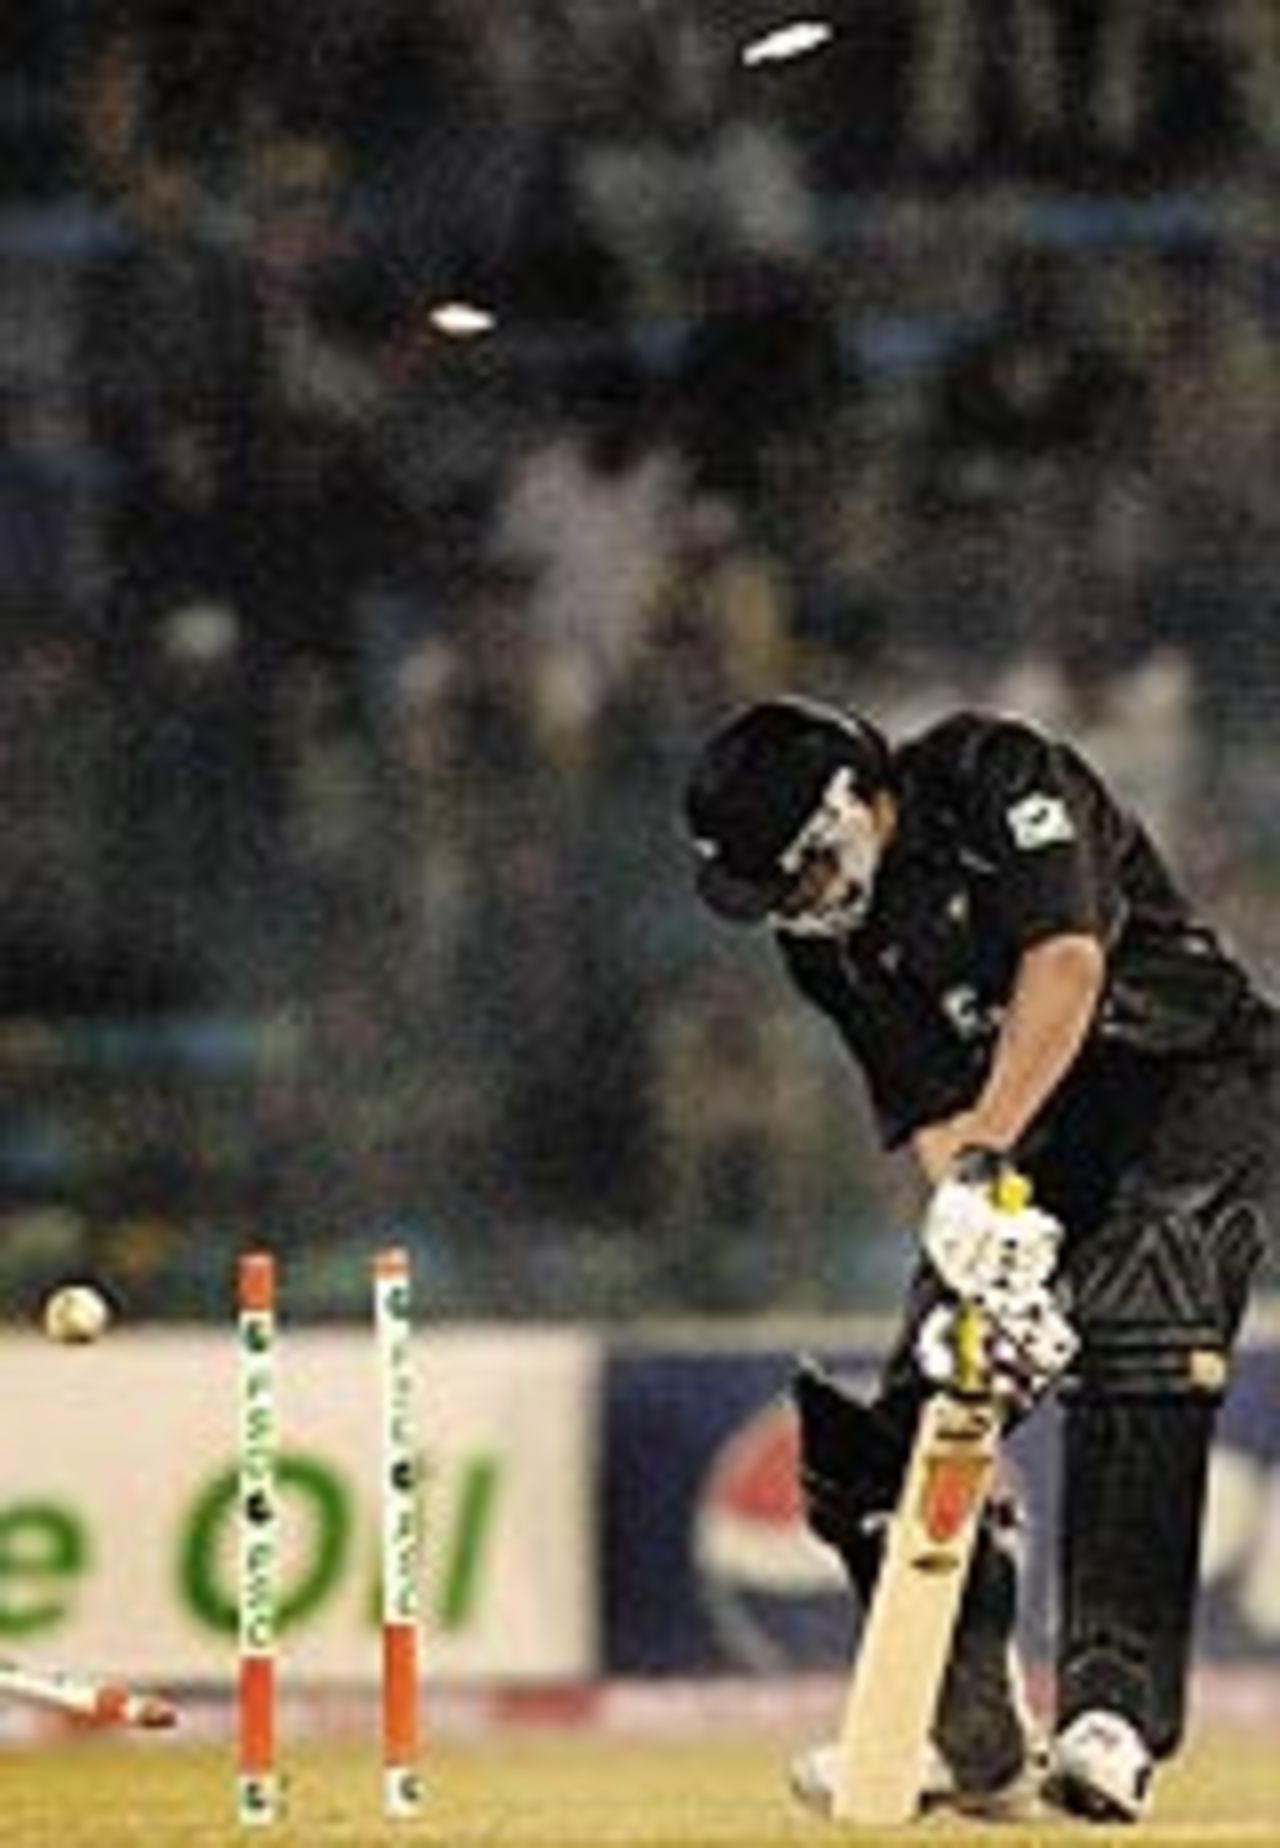 New Zealand batsman Tama Canning is clean bowled off Pakistani pace bowler Mohammad Sami (not in the picture) during the second One Day International (ODI) match between Pakistan and New Zealand at the Gaddafi stadium in Lahore, 01 December 2003